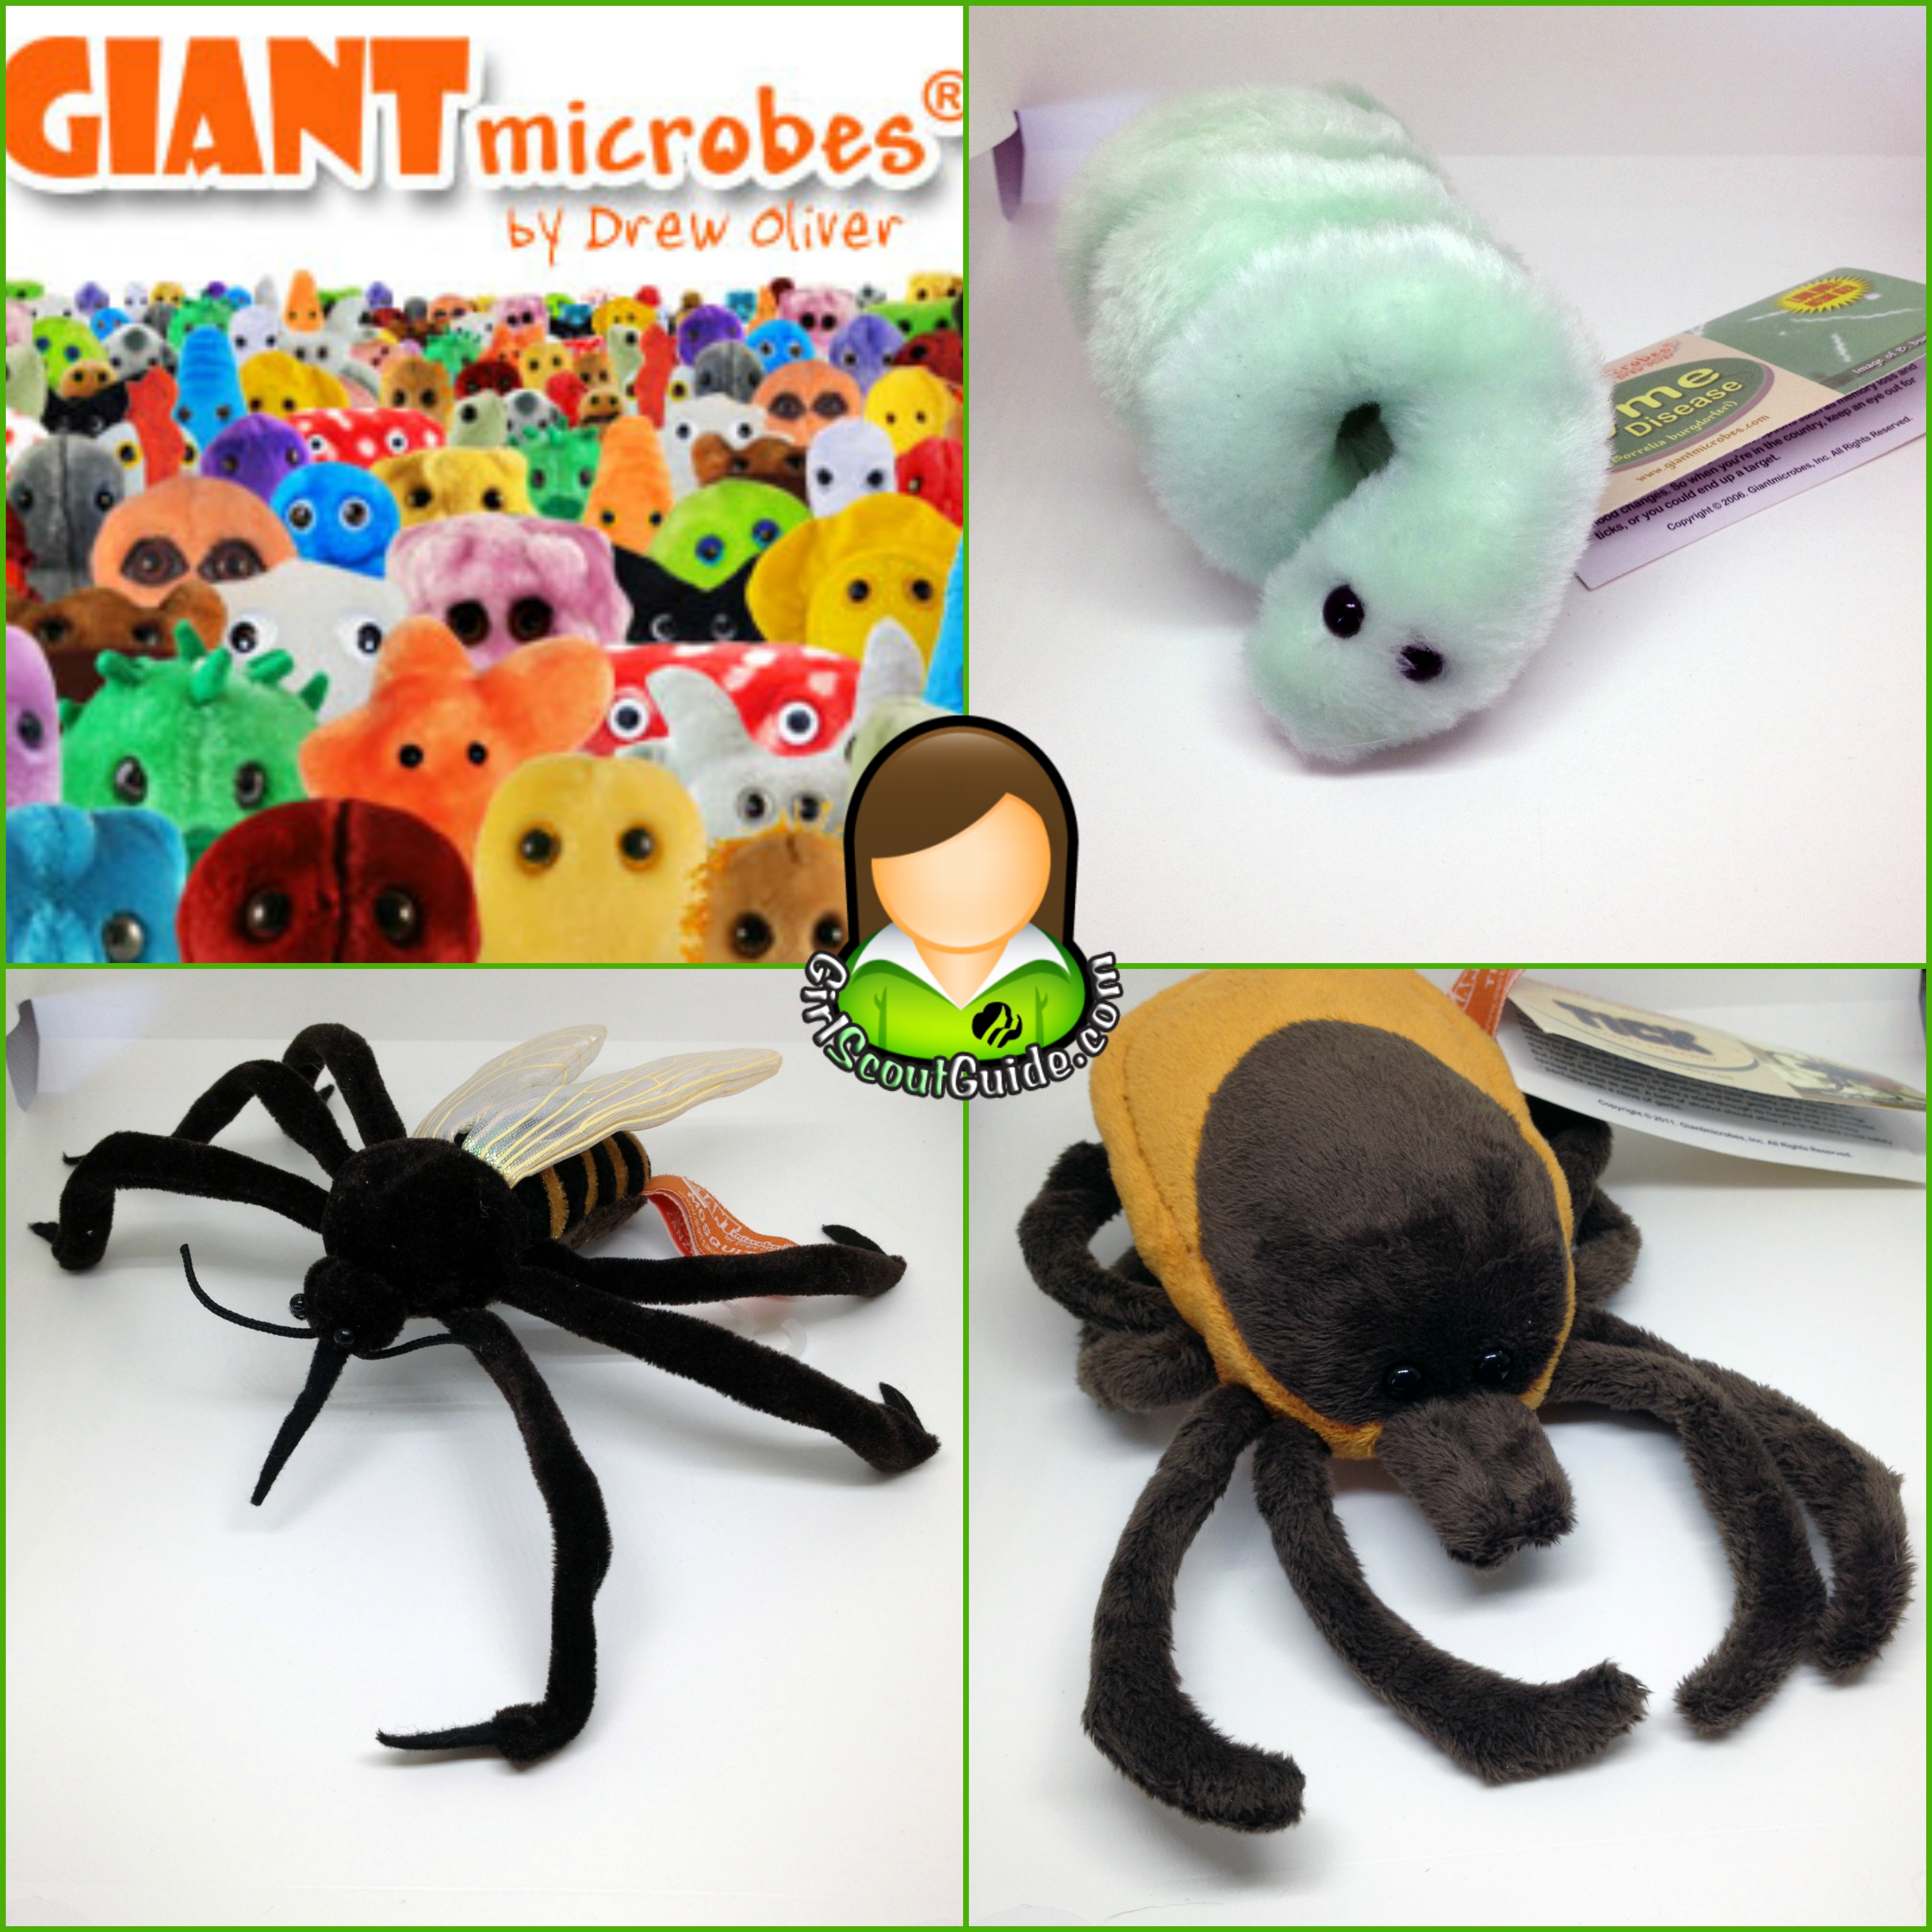 Teaching Camping Hazards with GIANTmicrobes